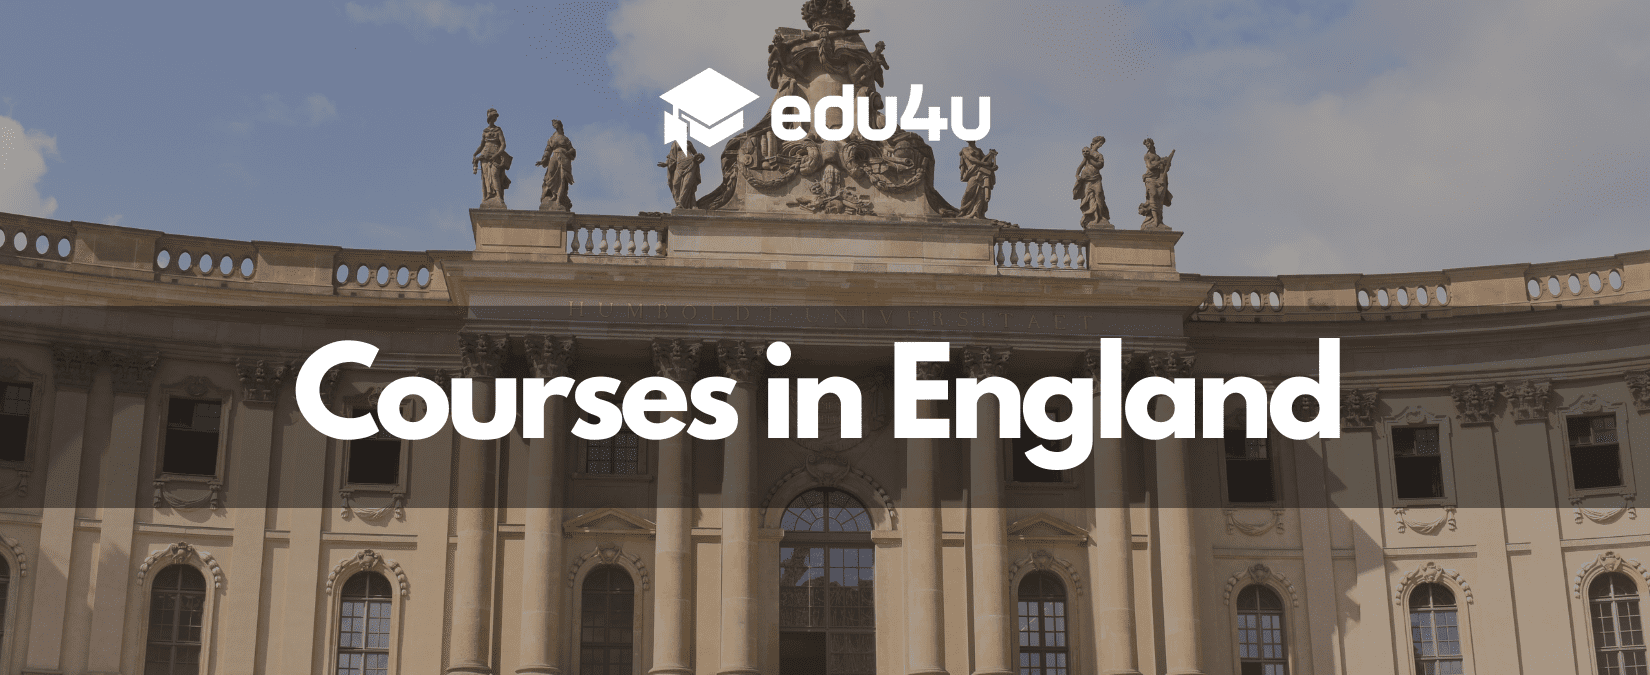 Courses in England